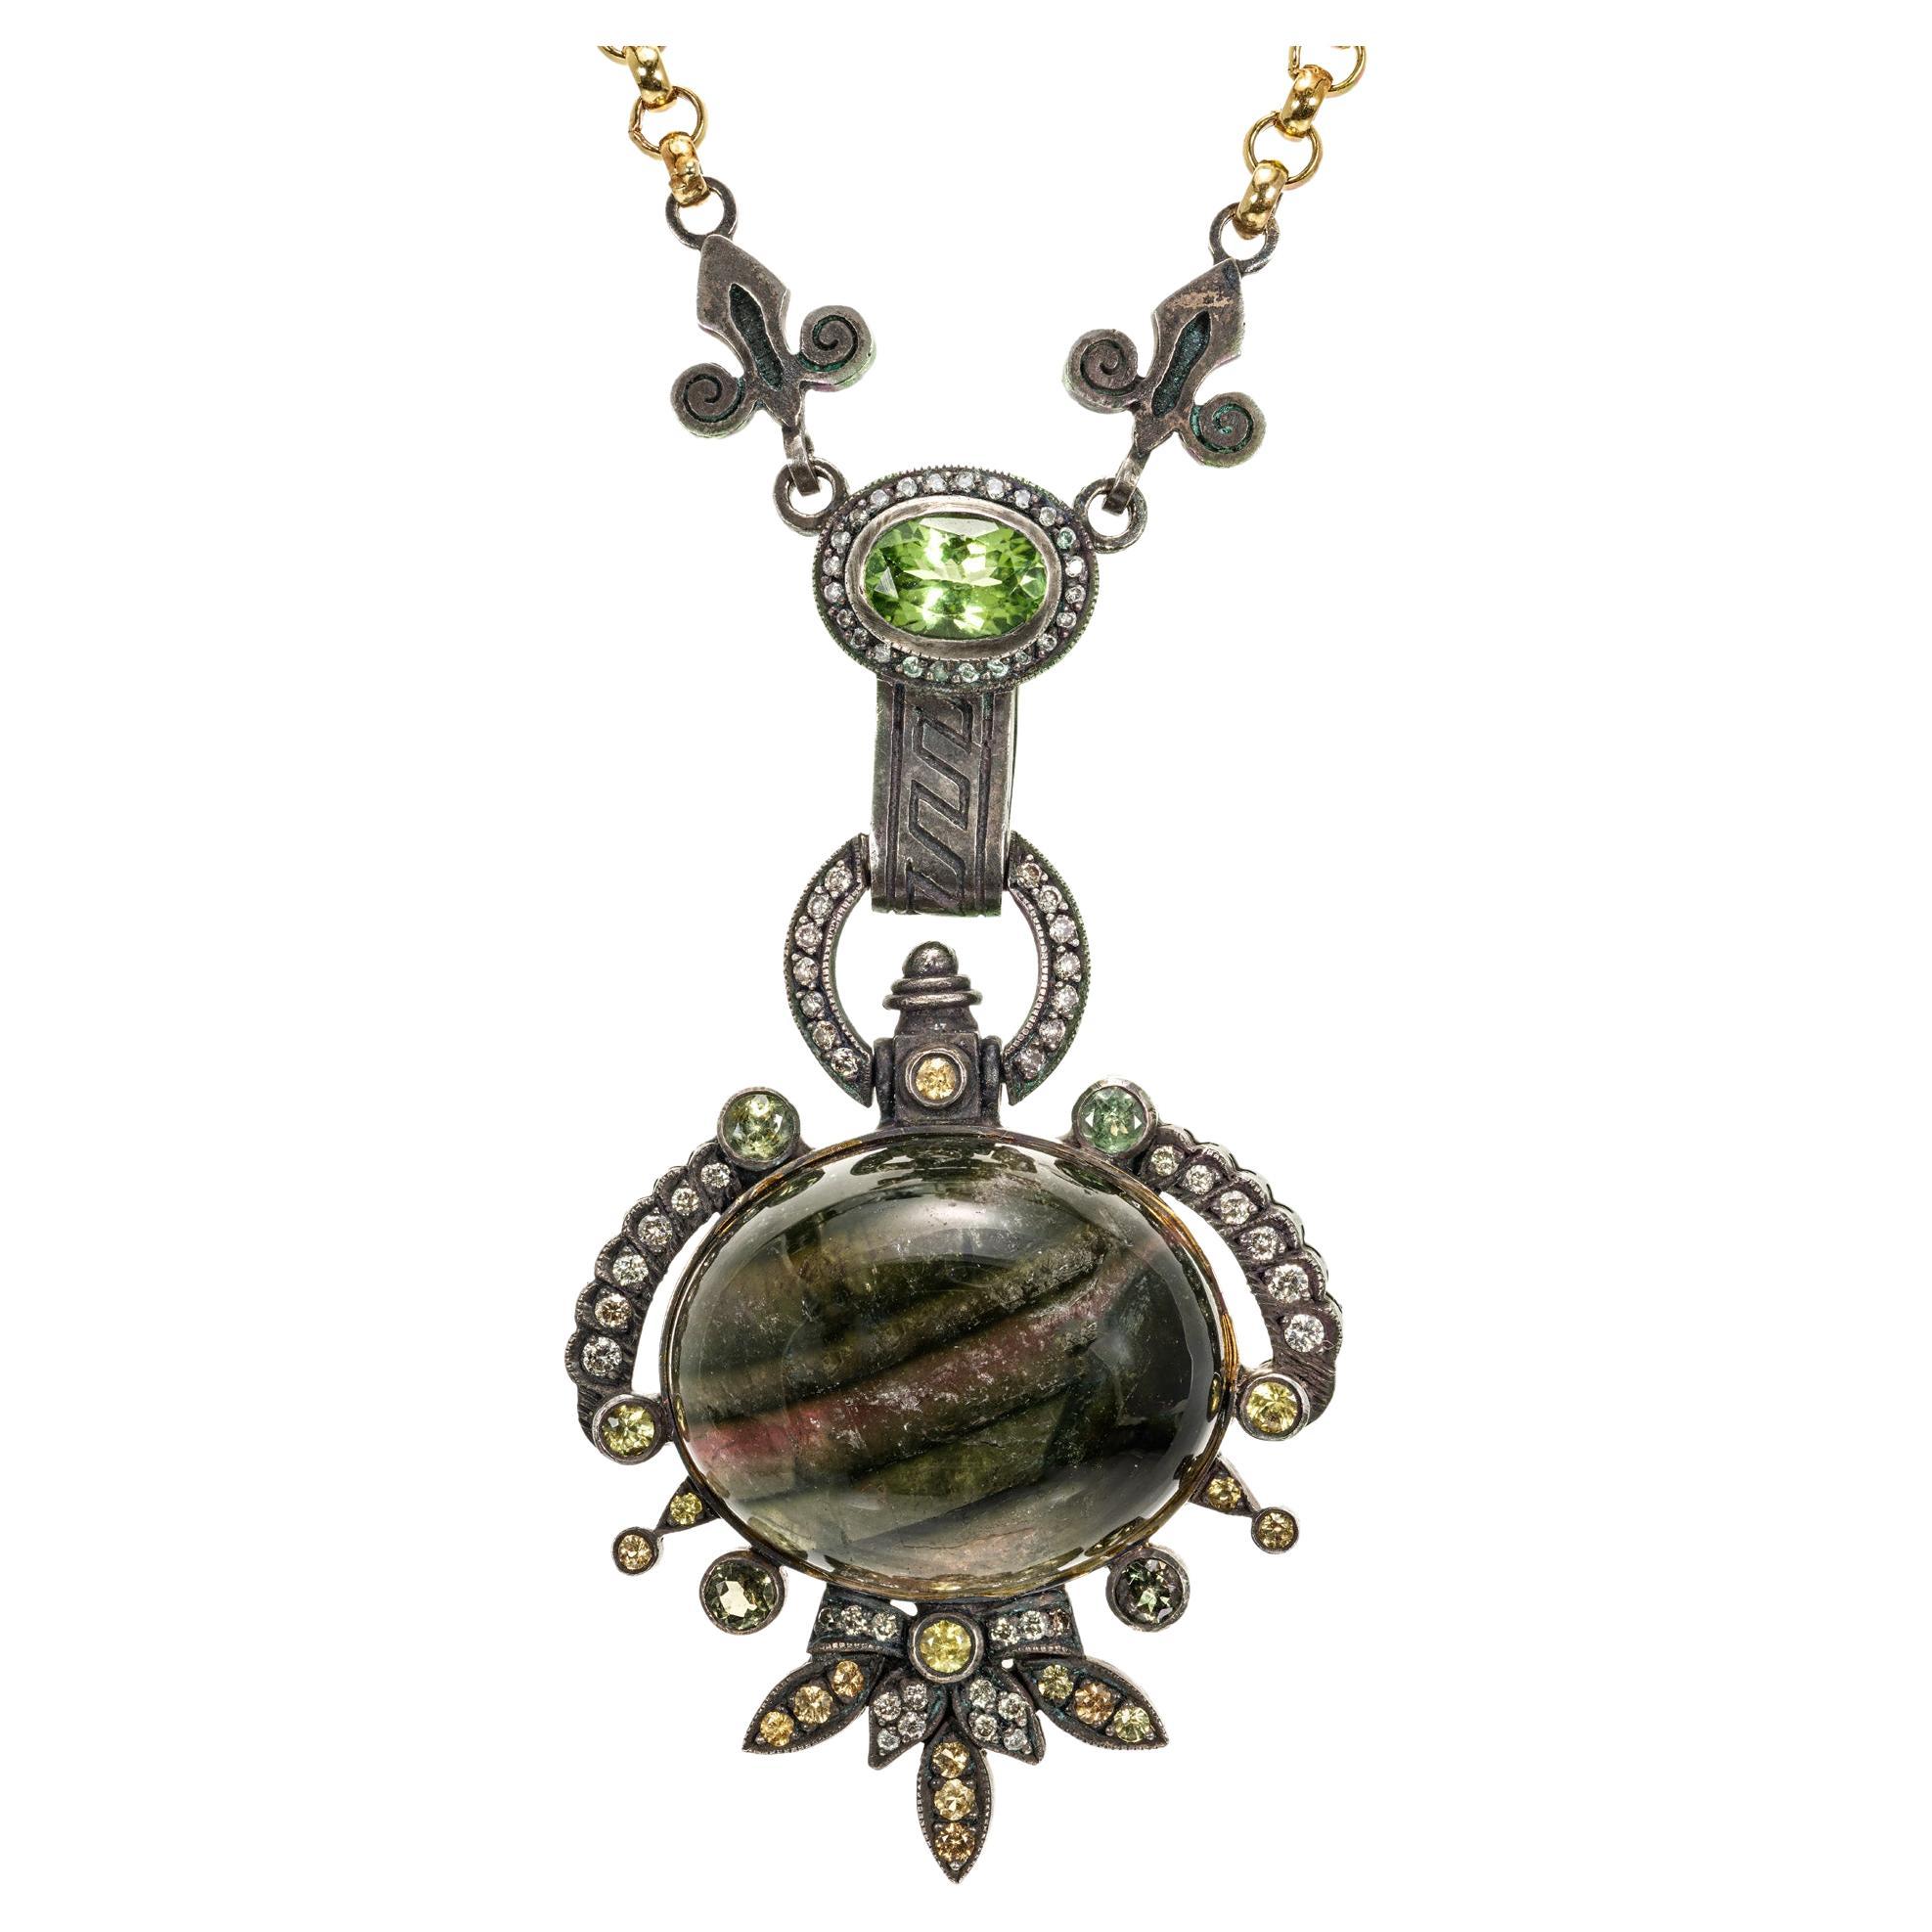 KK Wearable Sculpture Etruscan style necklace in 18k yellow gold and blackened Sterling silver. The center is a unique natural banded multi-color Tourmaline surrounded by 68 round diamonds and 21 assorted green, pink and golden brown tourmalines. 17